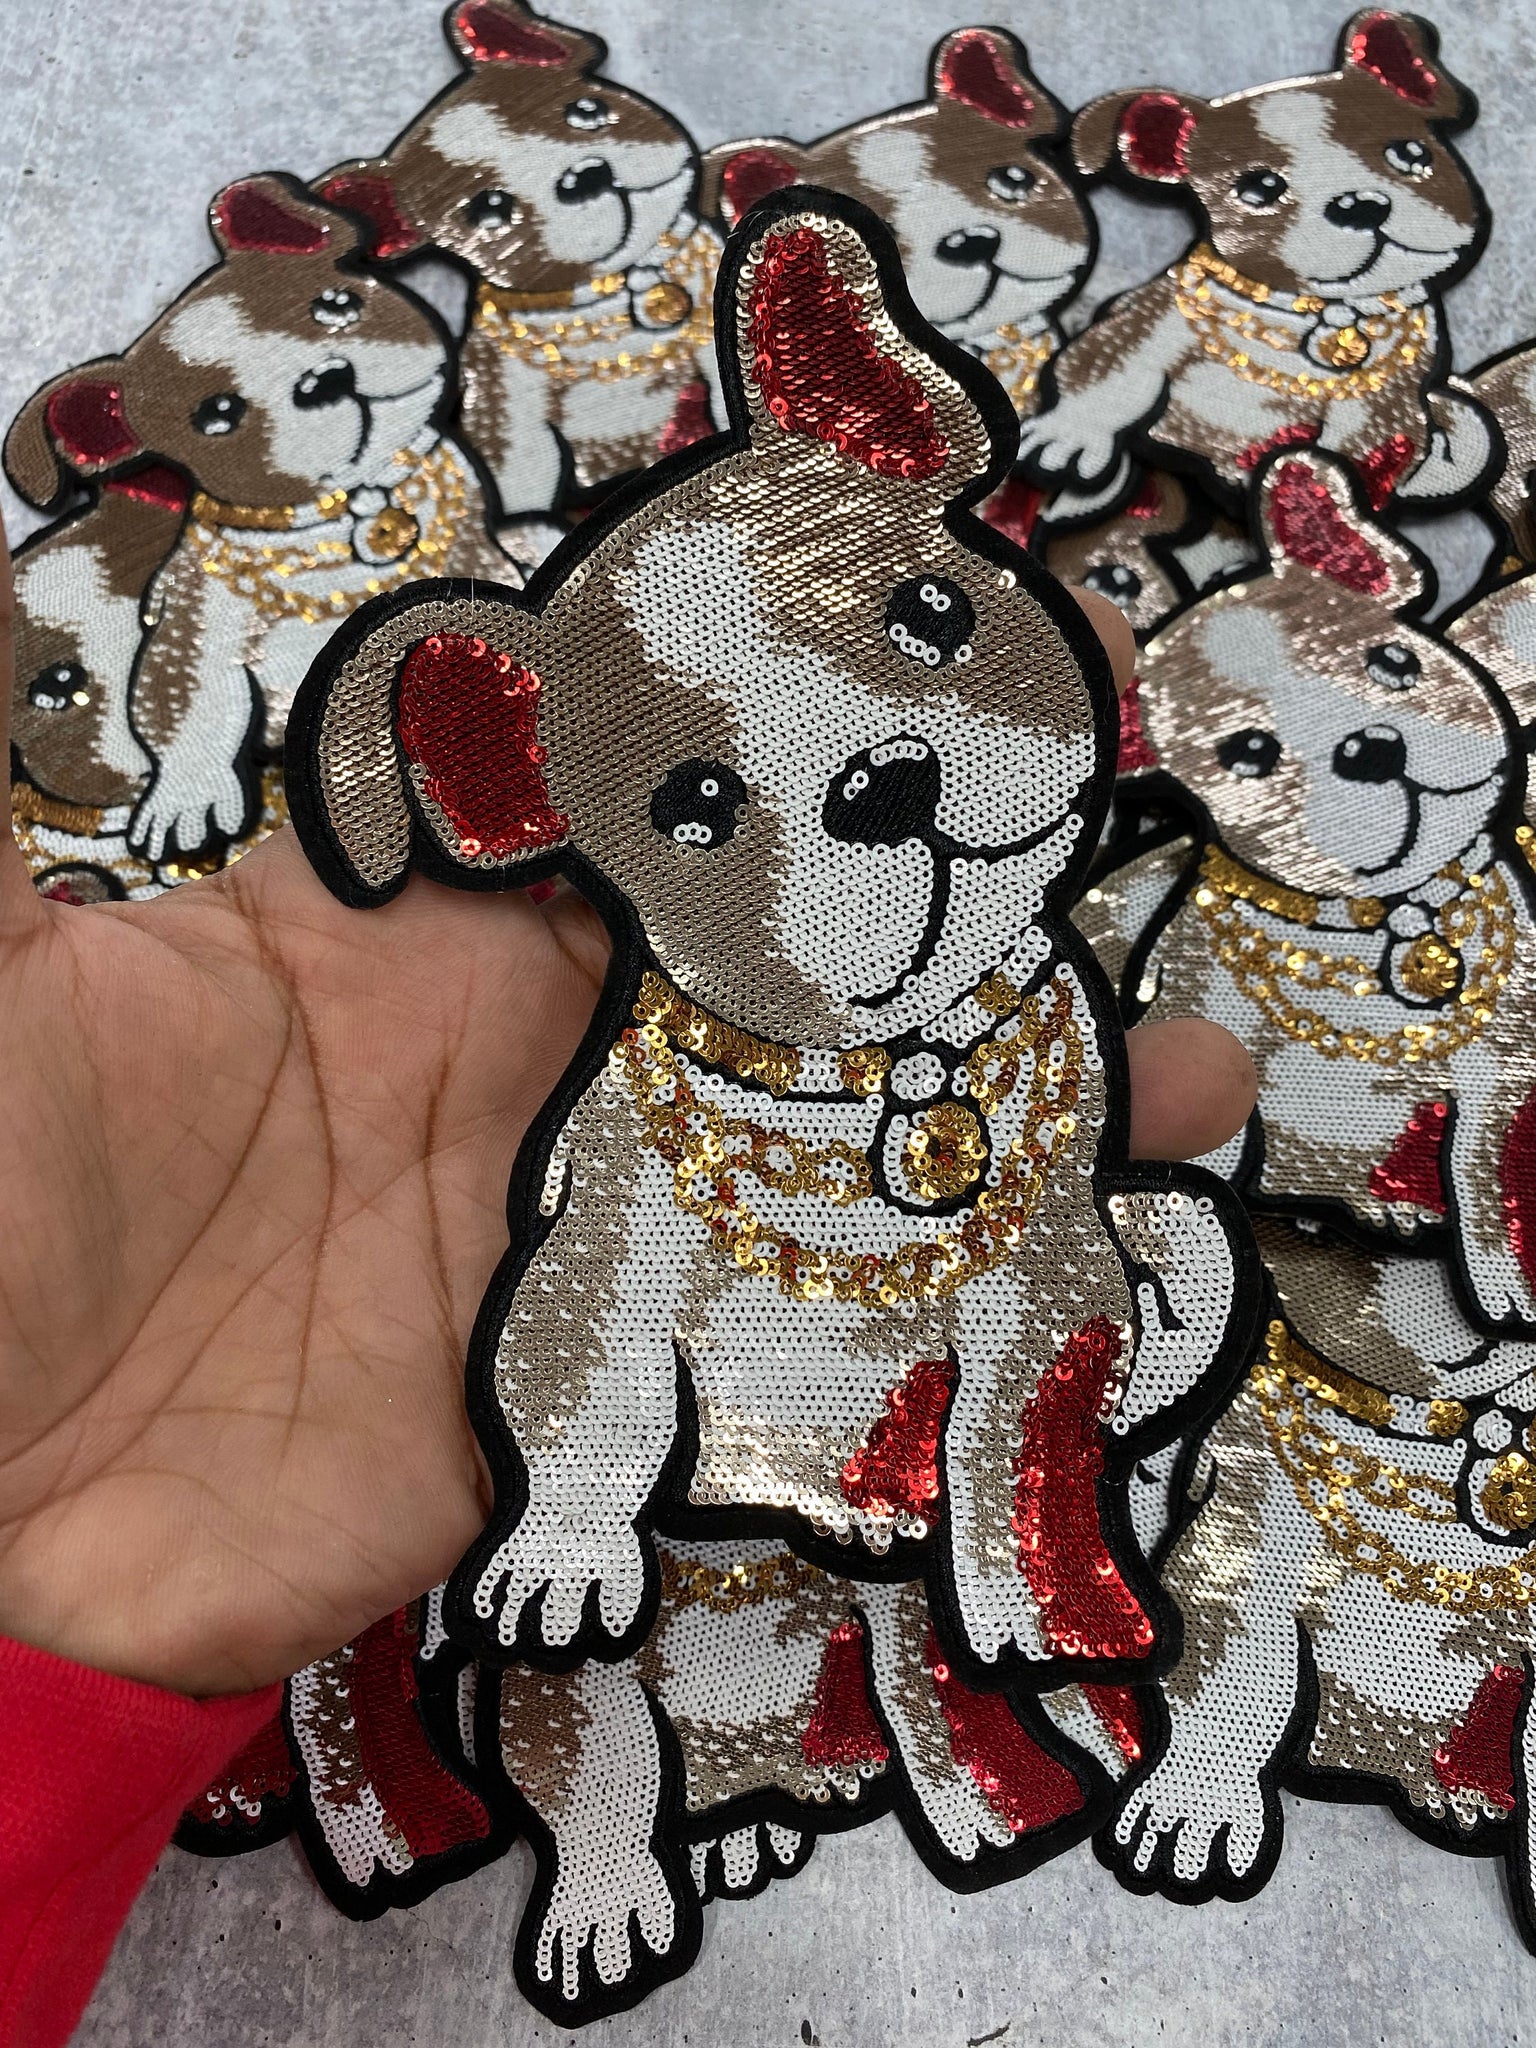 New Arrival, Cool Puppy With Chains, Iron-on Patch, Large Patch; Cool Bling Patch, DIY Applique; Vintage Patch, Animal Patch, Doggy Vest